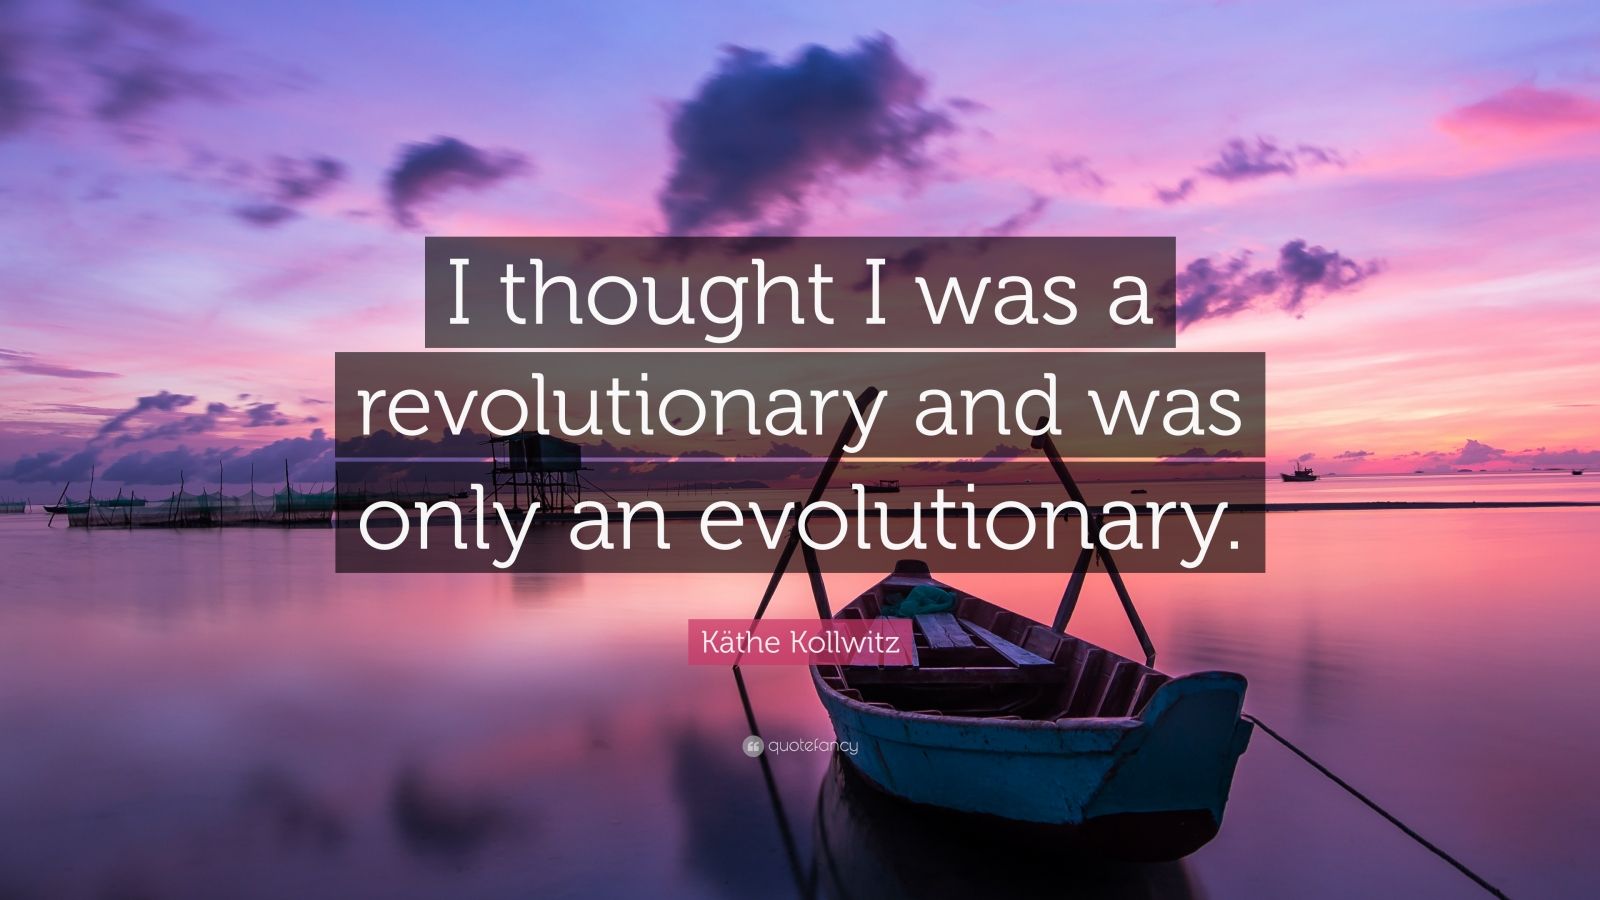 Käthe Kollwitz Quote: “I thought I was a revolutionary and was only an